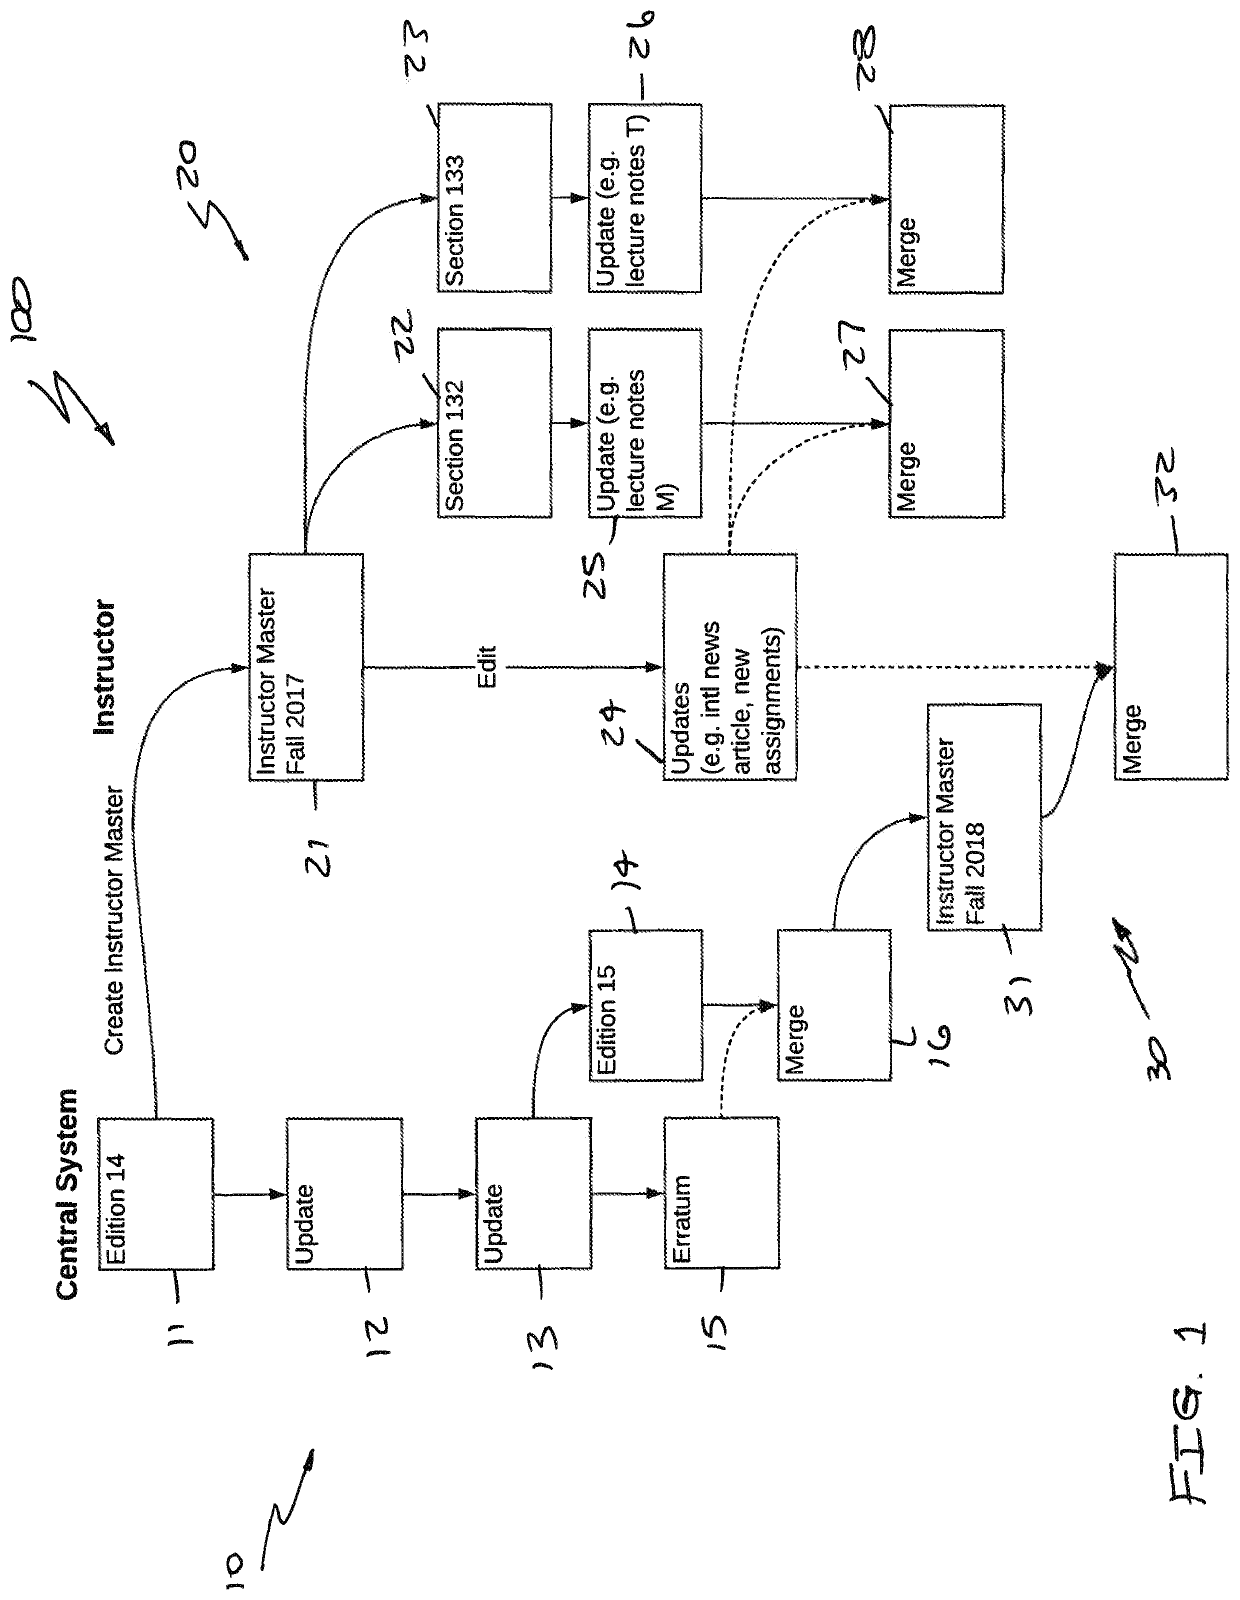 Systems and methods for producing incremental revised content